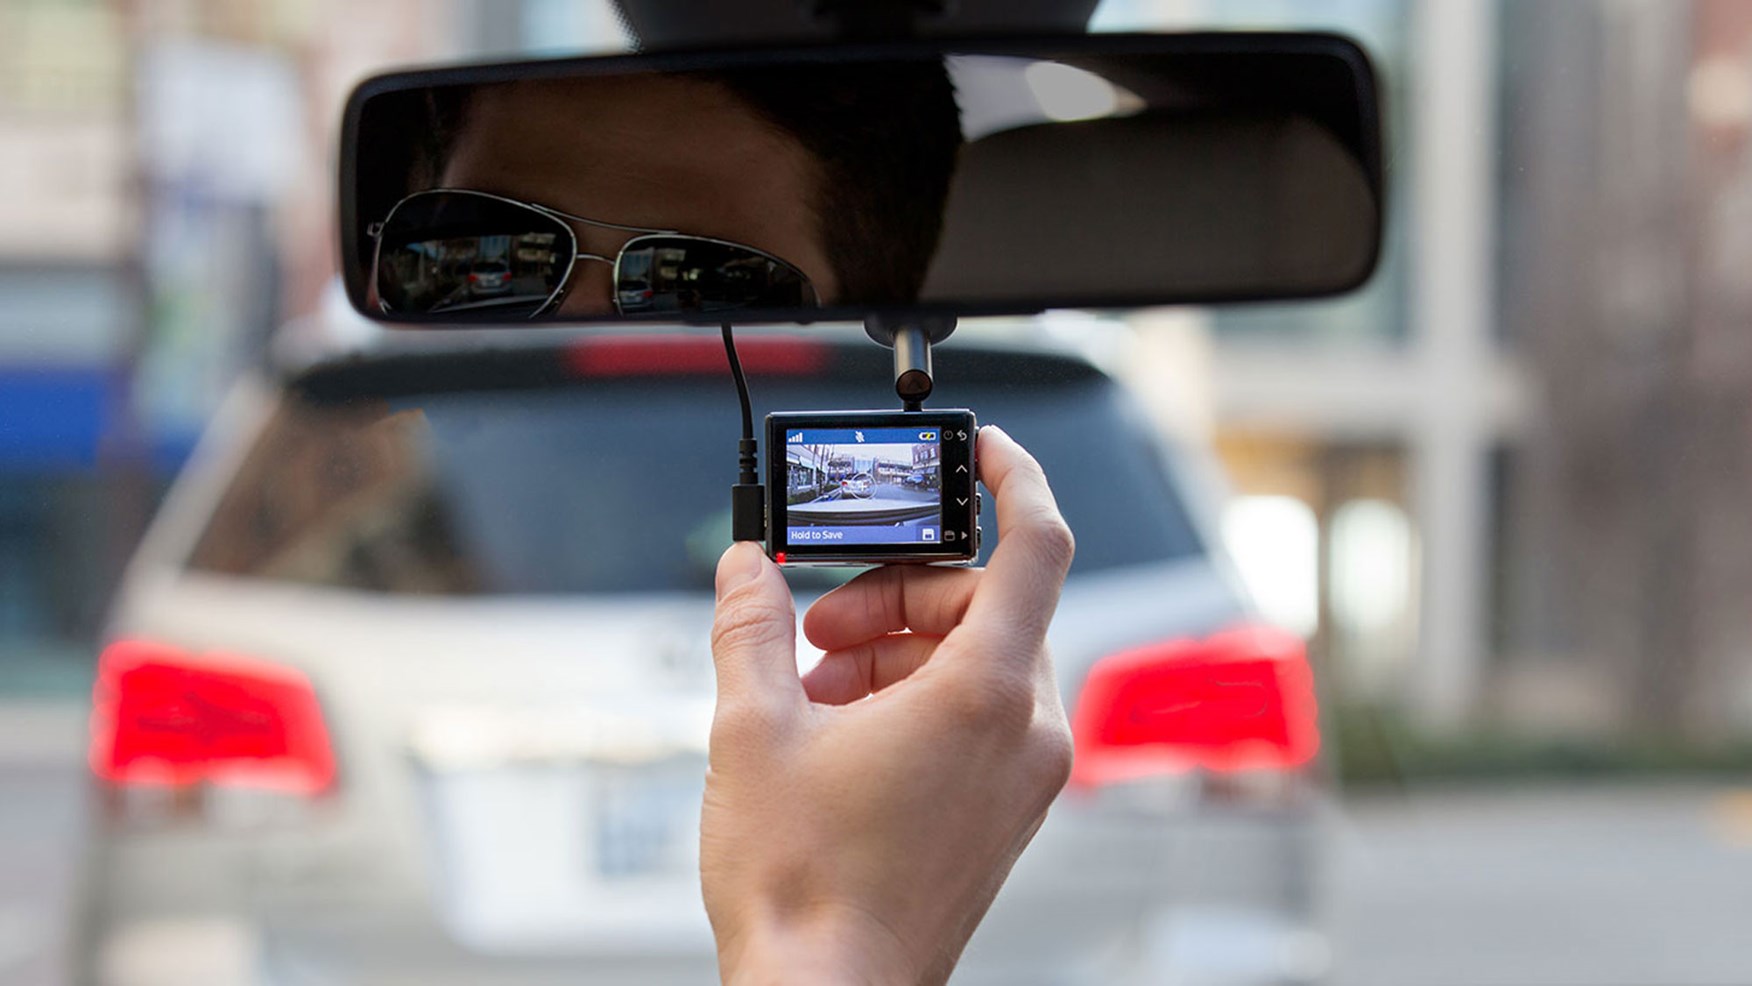 Here's Why Dash Cams Are Totally Worth It